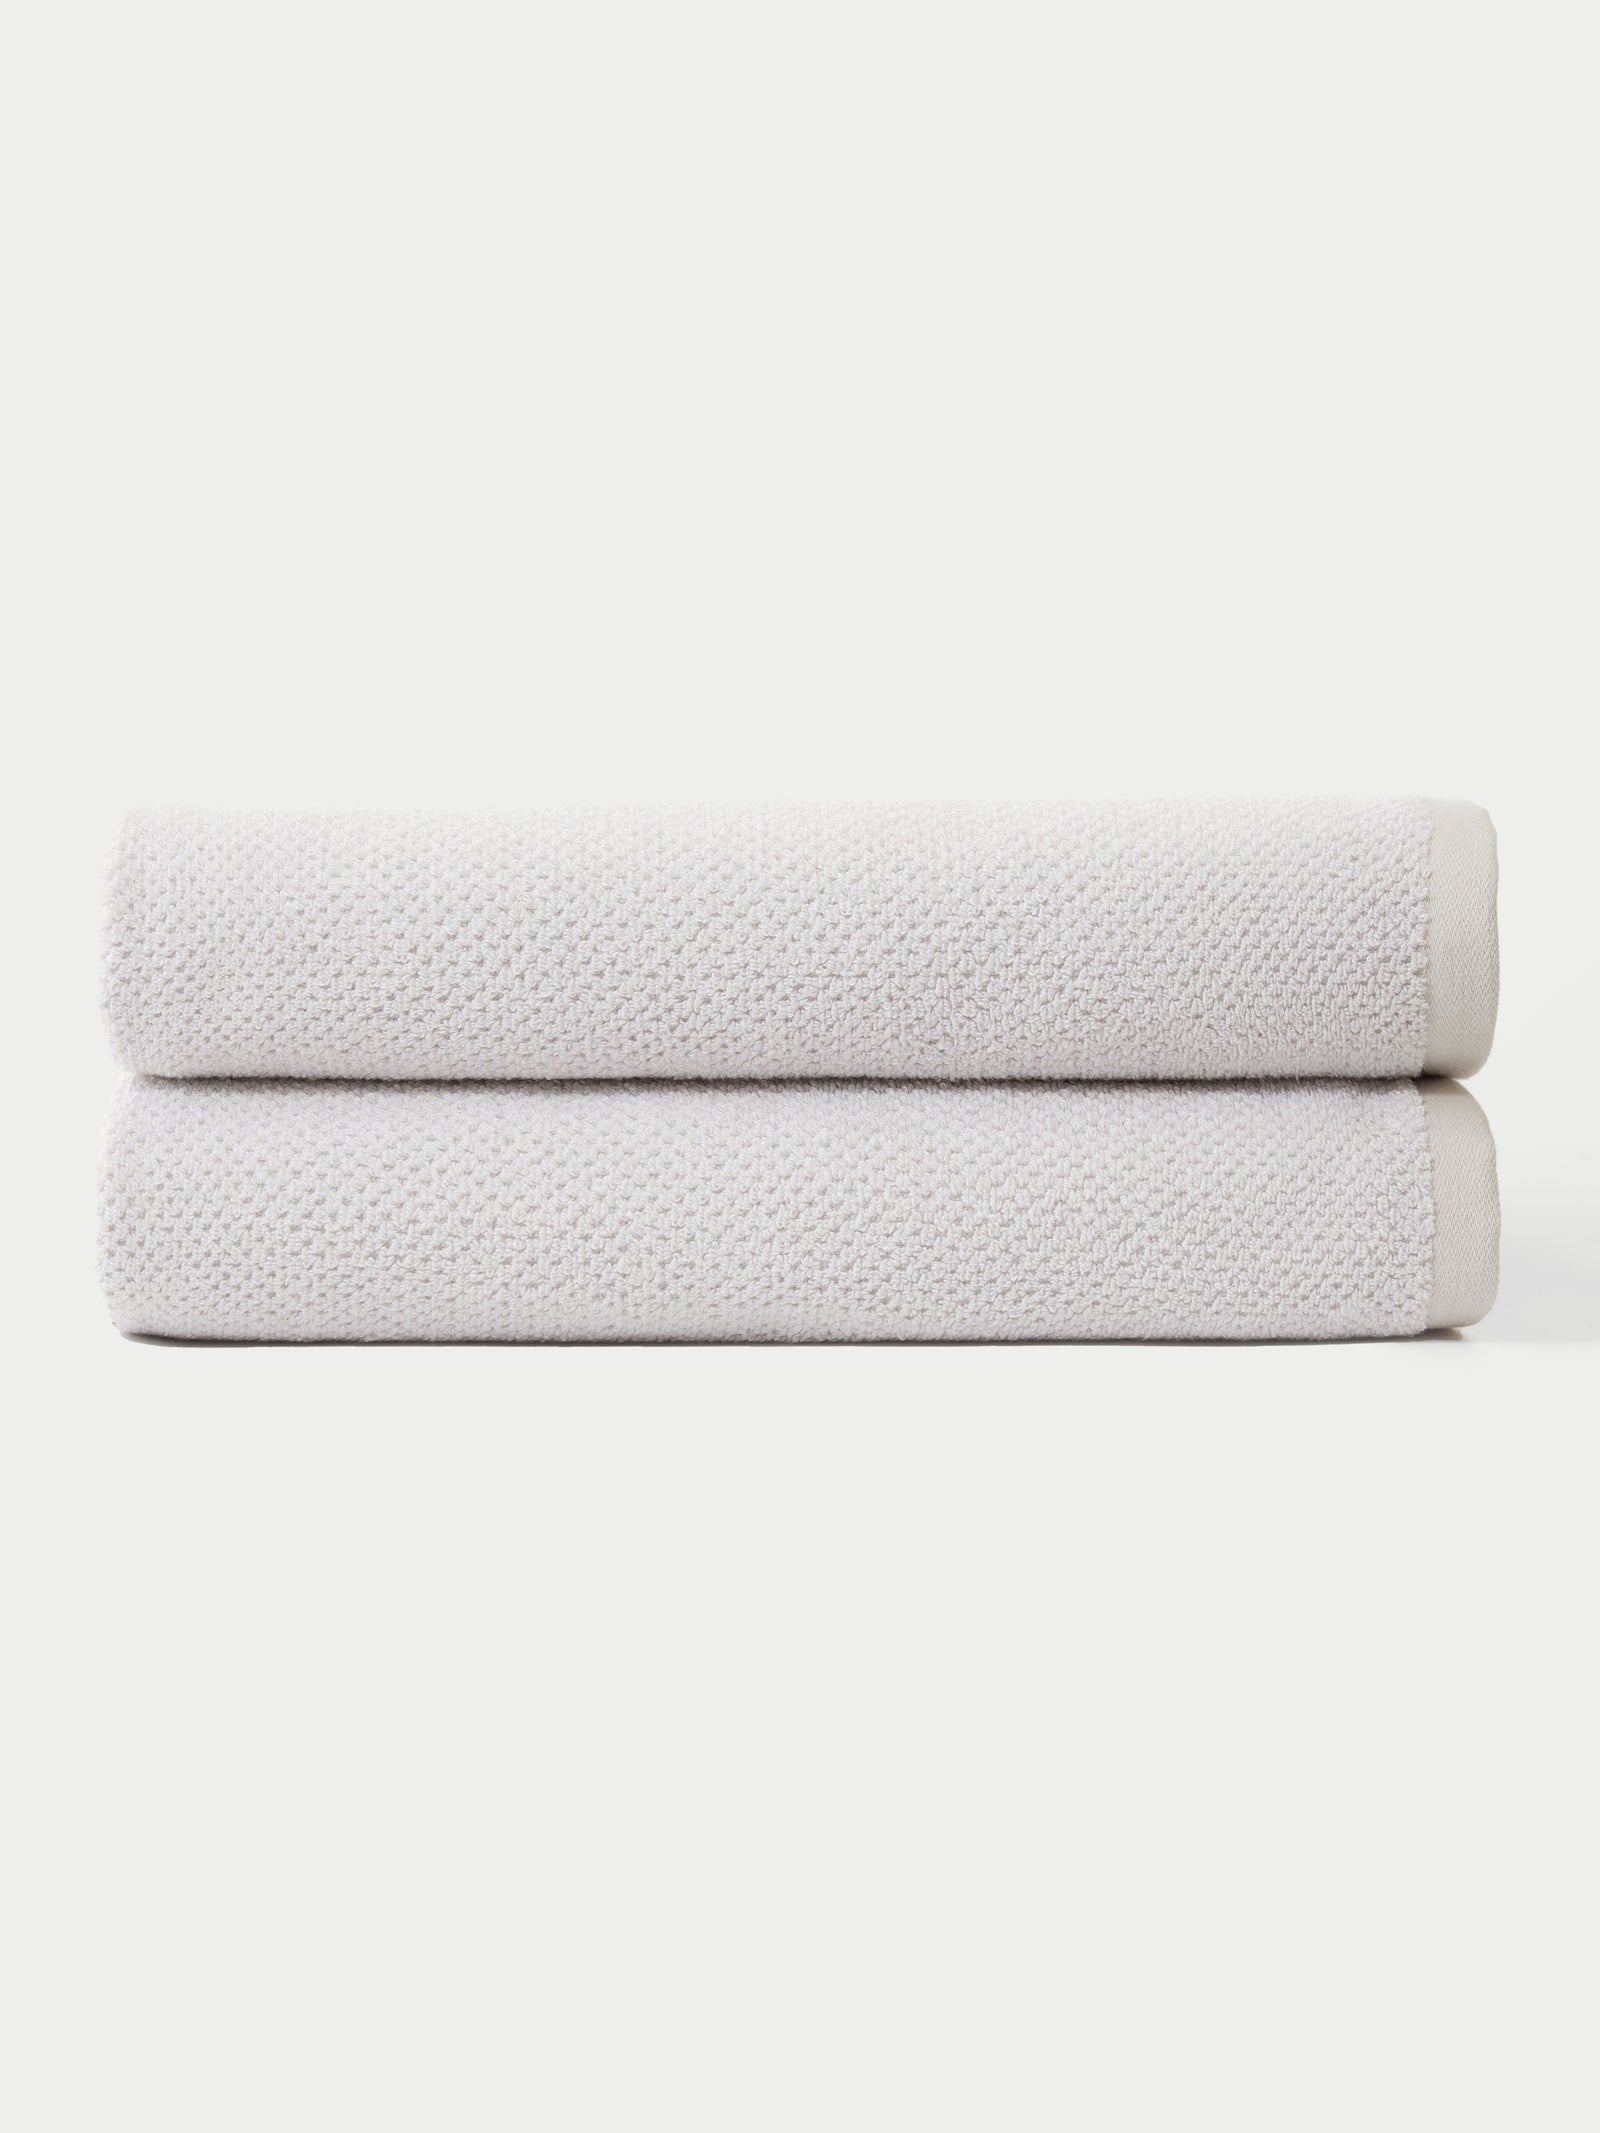 Nantucket Bath Sheets in the color Heathered Light Grey. The bath sheets are neatly folded. The photo of the bath sheets was taken with a white background.